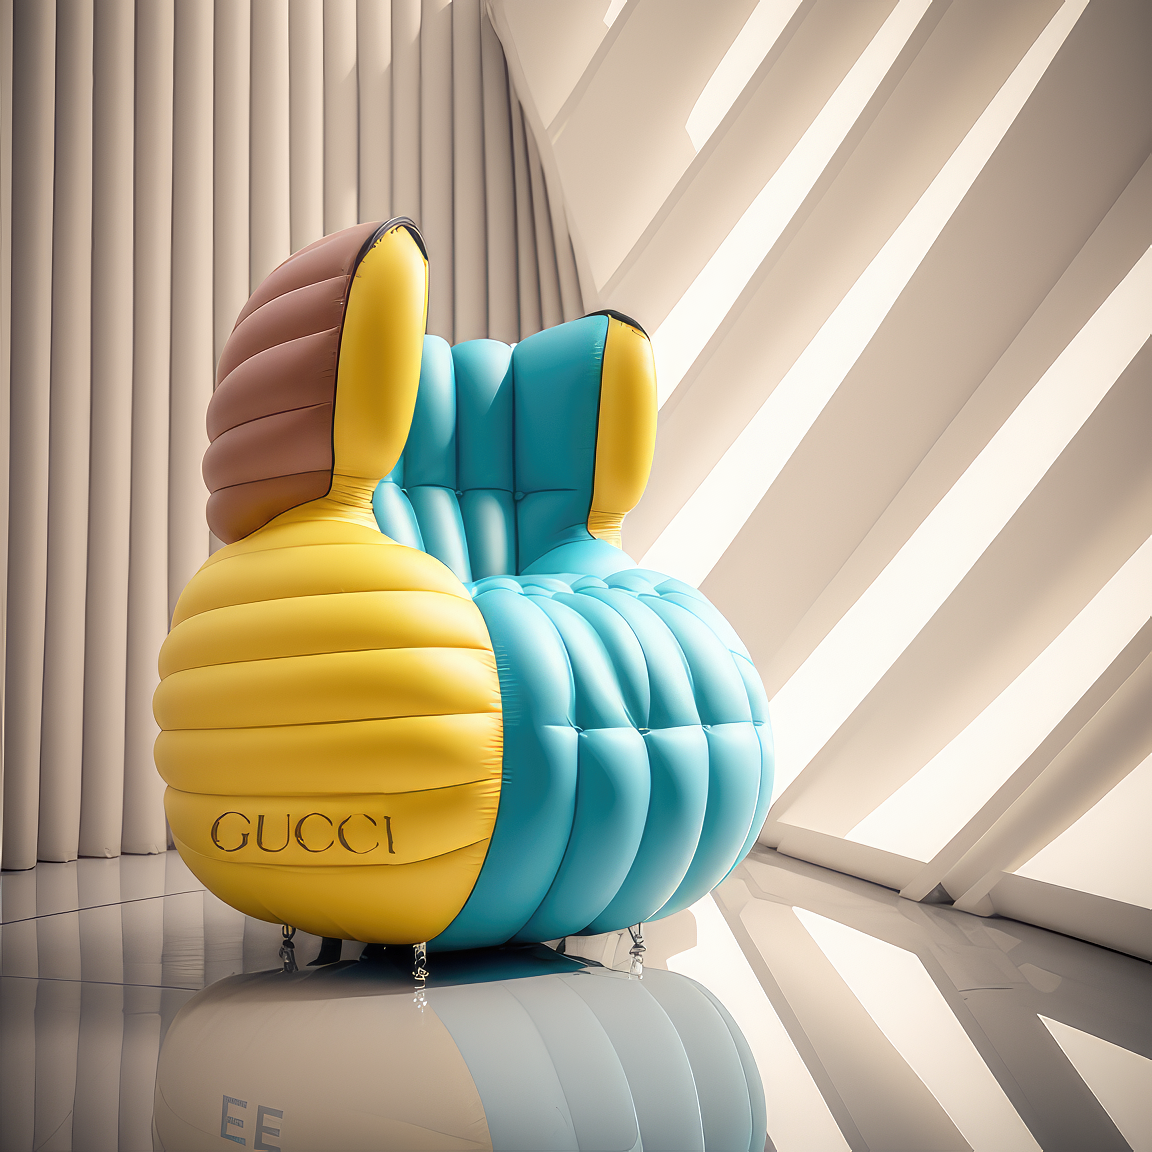 tonycncp_Fendi_inspired_inflatable_eames_chair_display_color-co_c39d39c0-5c26-4098-8de2-e54e43dbf891-gigapixel-standard-scale-2_00x.png